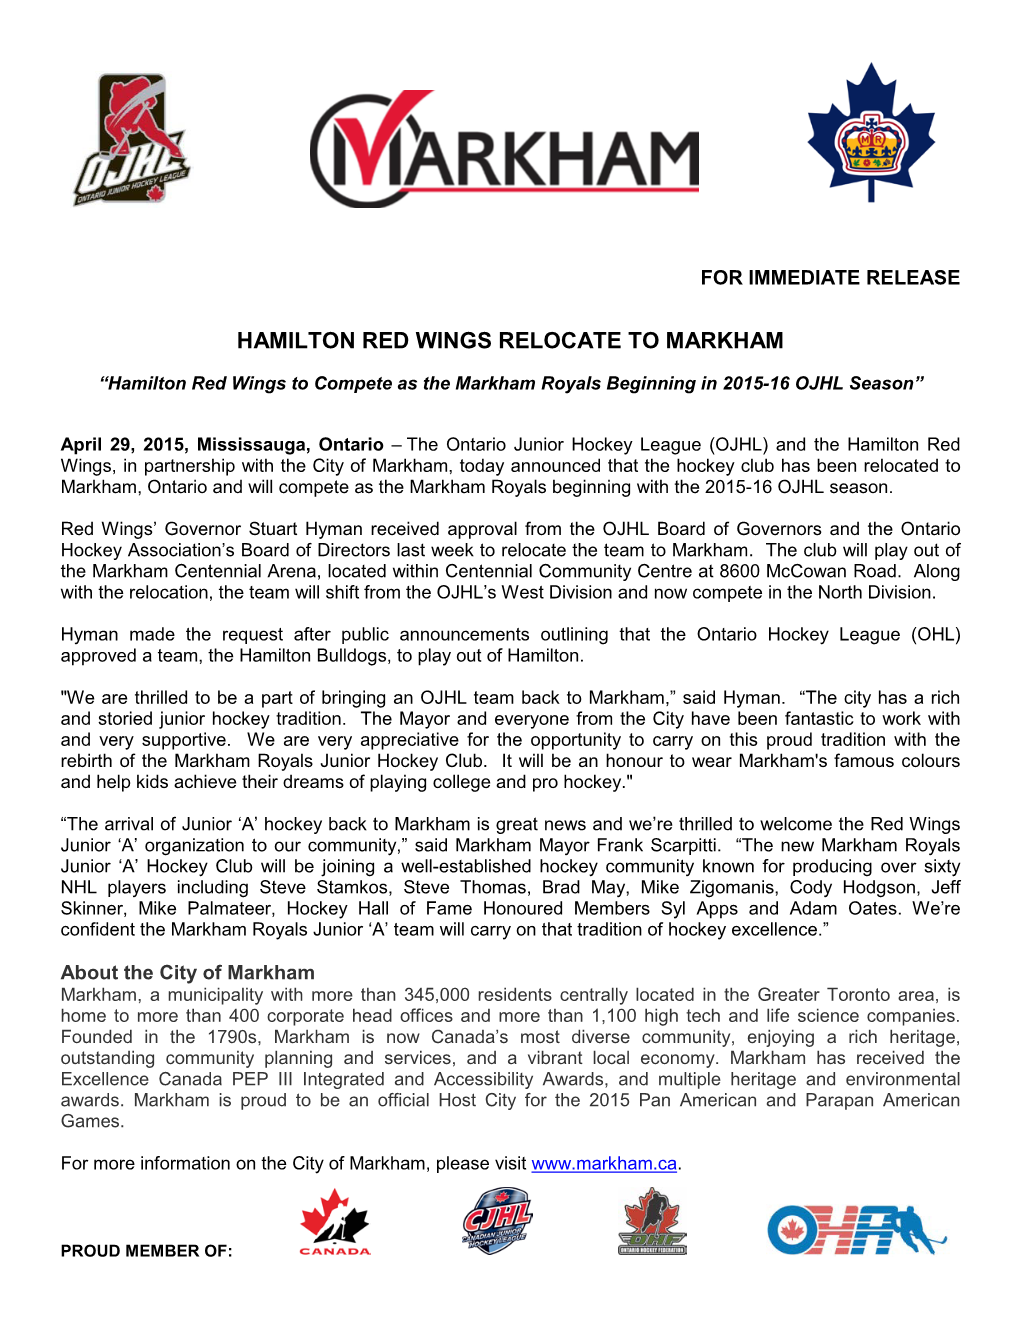 Hamilton Red Wings Relocate to Markham